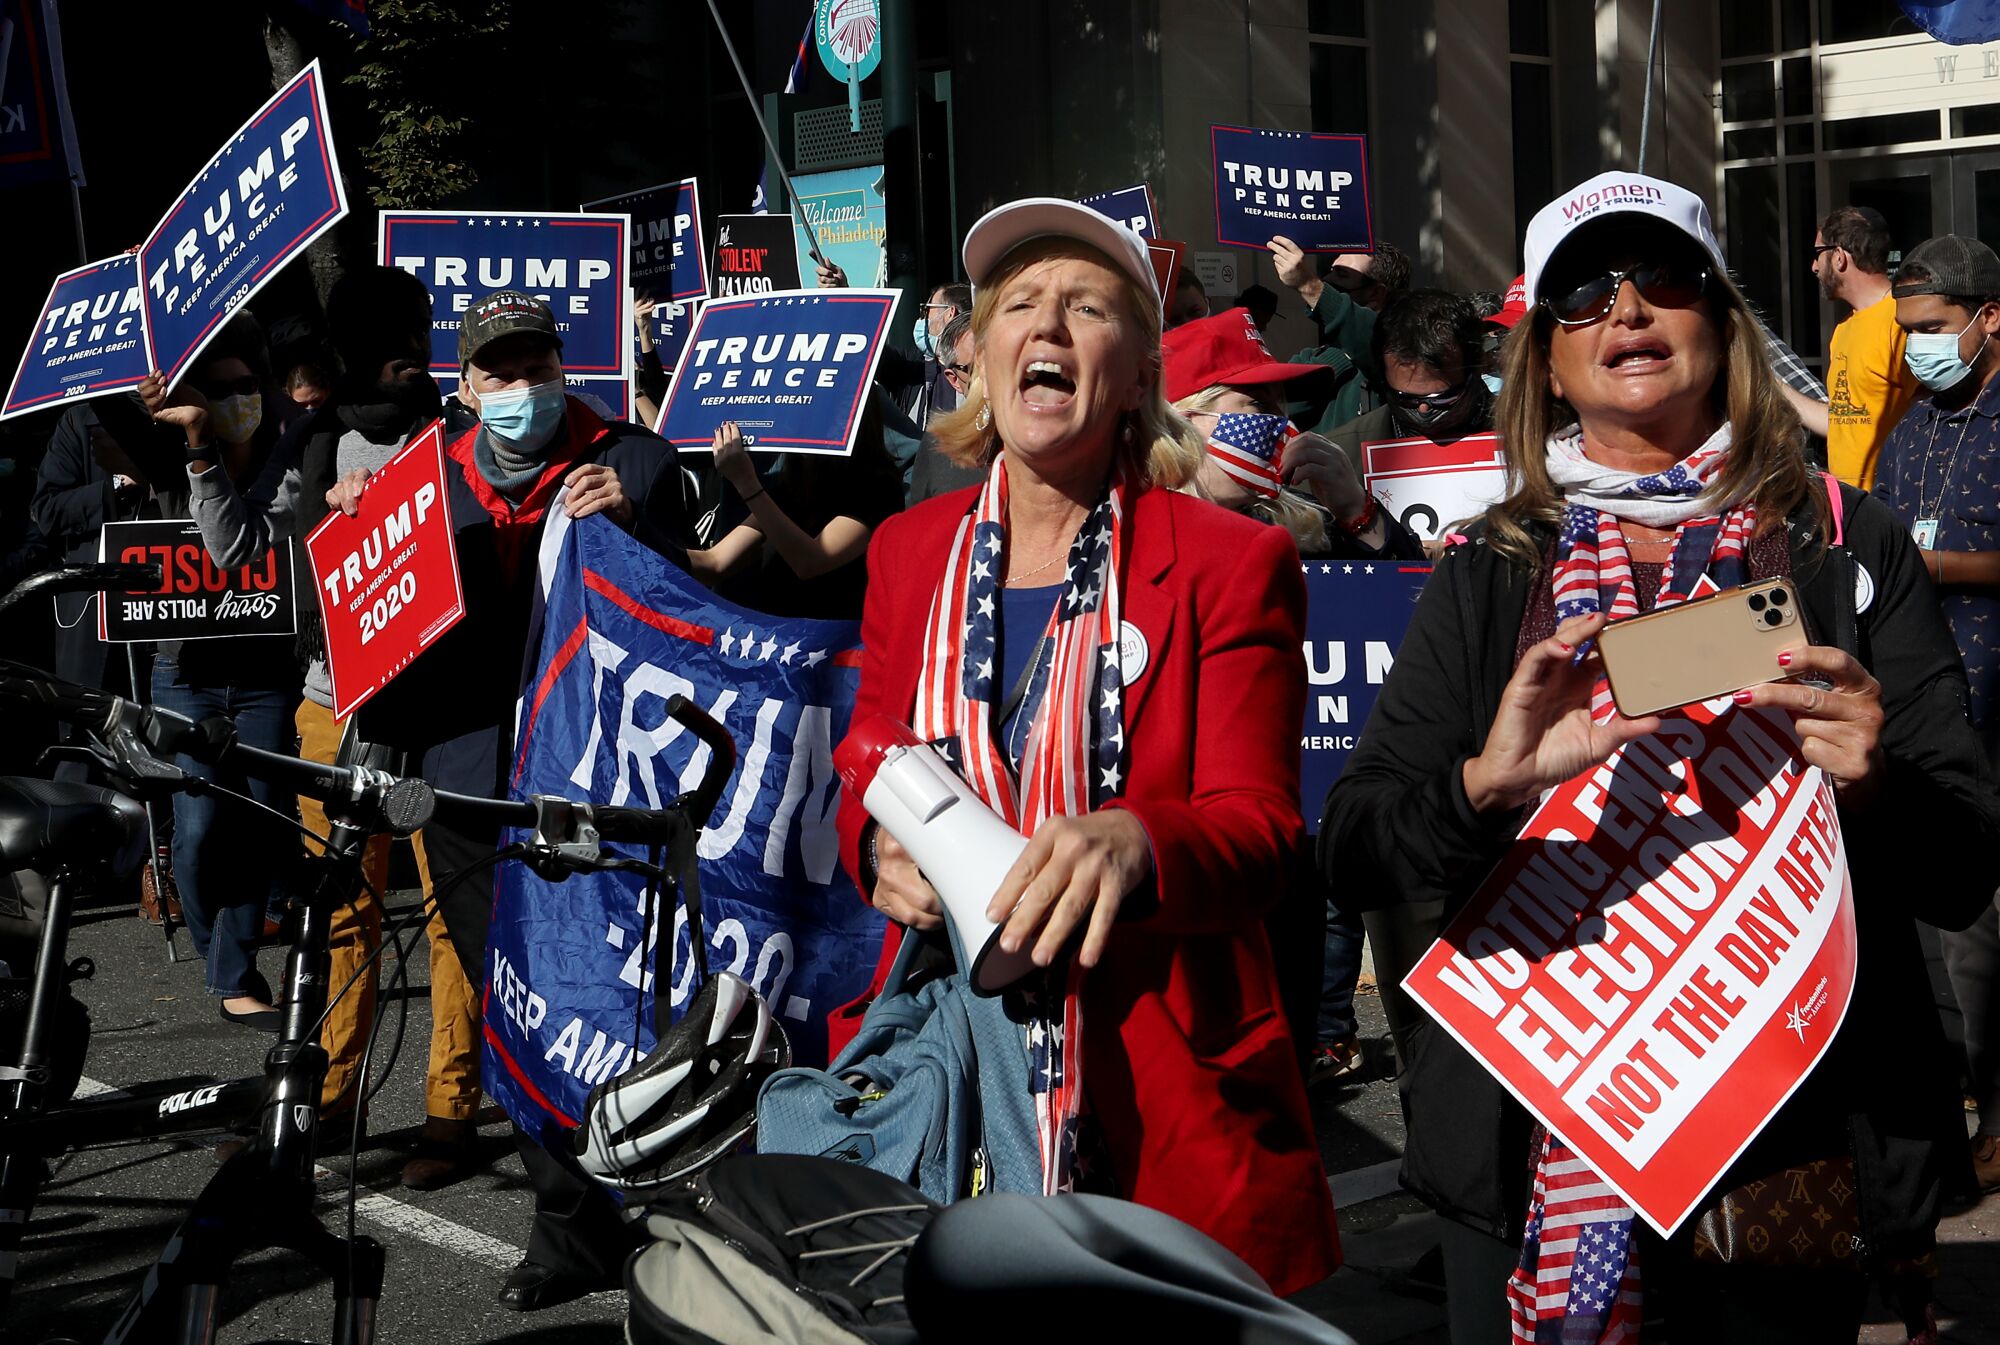 People hold signs reading "Trump 2020," "Trump Pence" and "Voting ends on election day, not the day after."